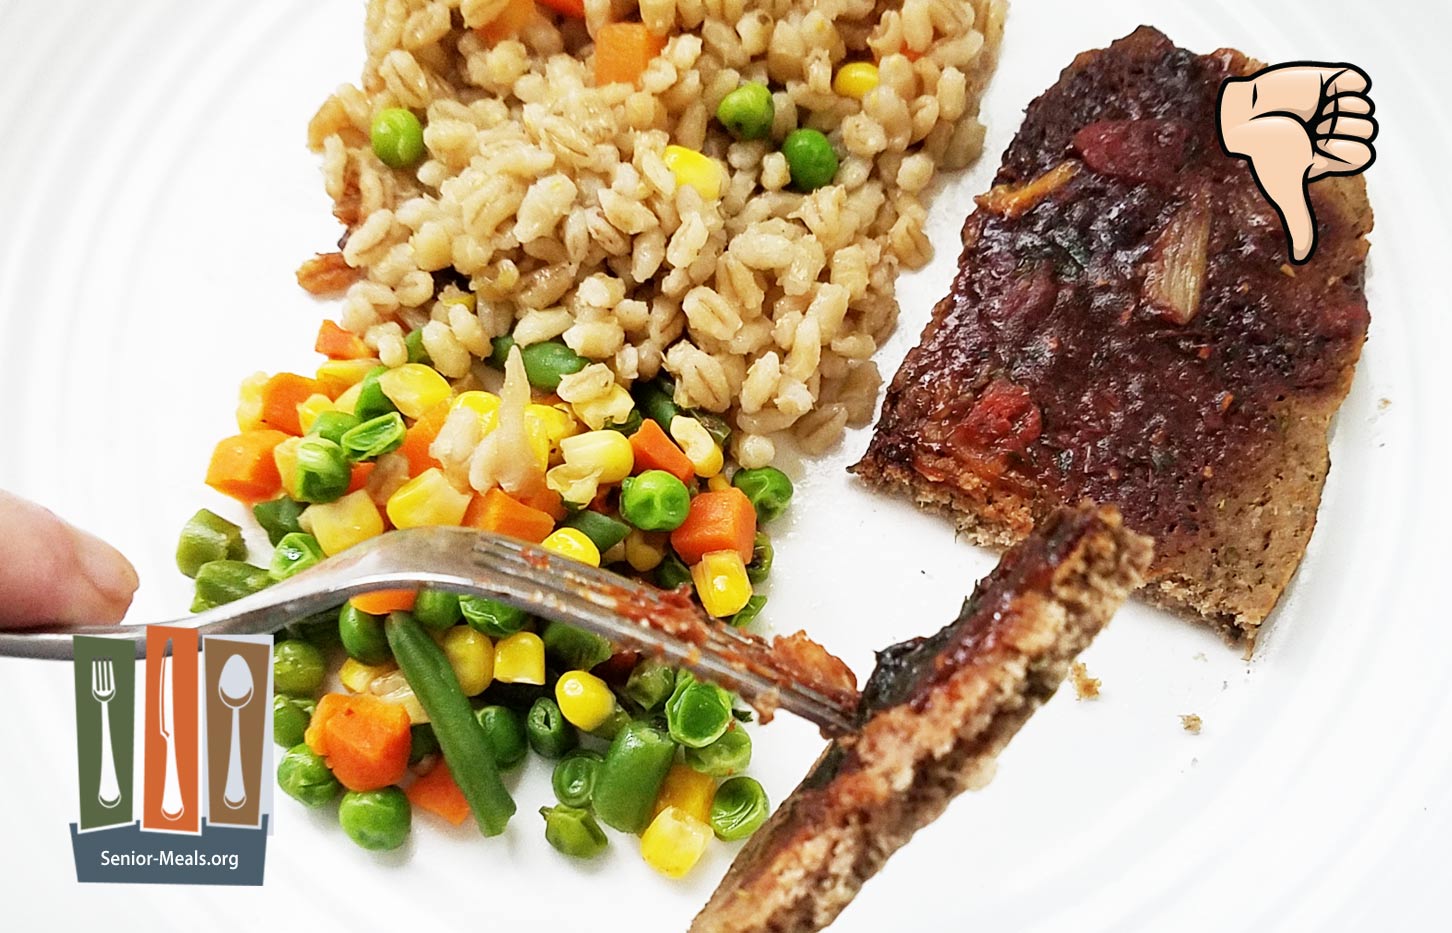 MK Signature Meal - Home-style Meatloaf with Tomato Gravy, Barley Mushroom Risotto and Mixed Vegetables - $12